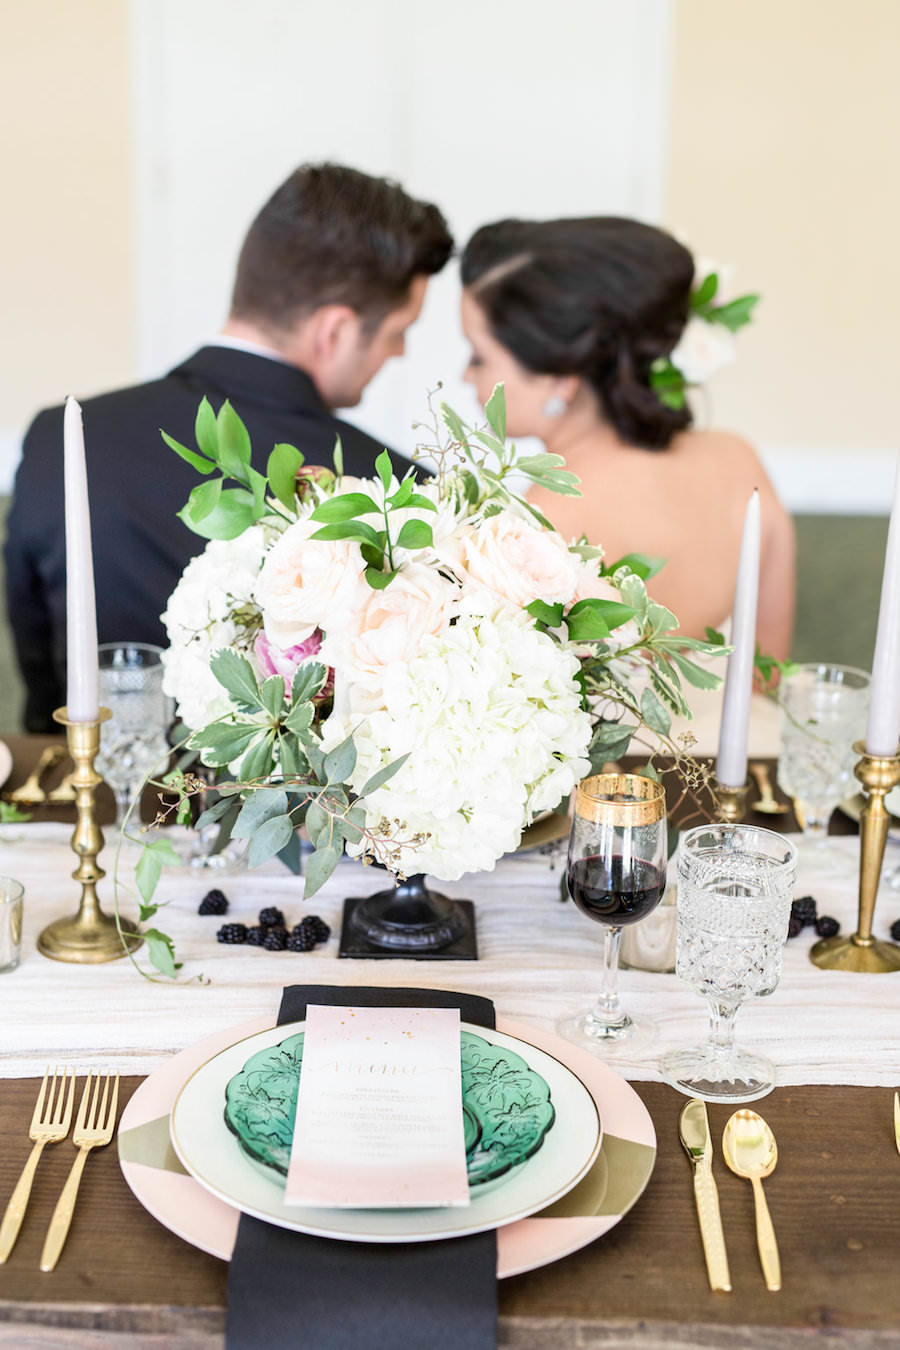 Ivory, White Rose and Blush Pink Wedding Centerpieces with Gold and Green Vintage China Charger and Gold Siliverware on Wooden Farm Table | Tampa Wedding Decor Ever After Vintage Rentals